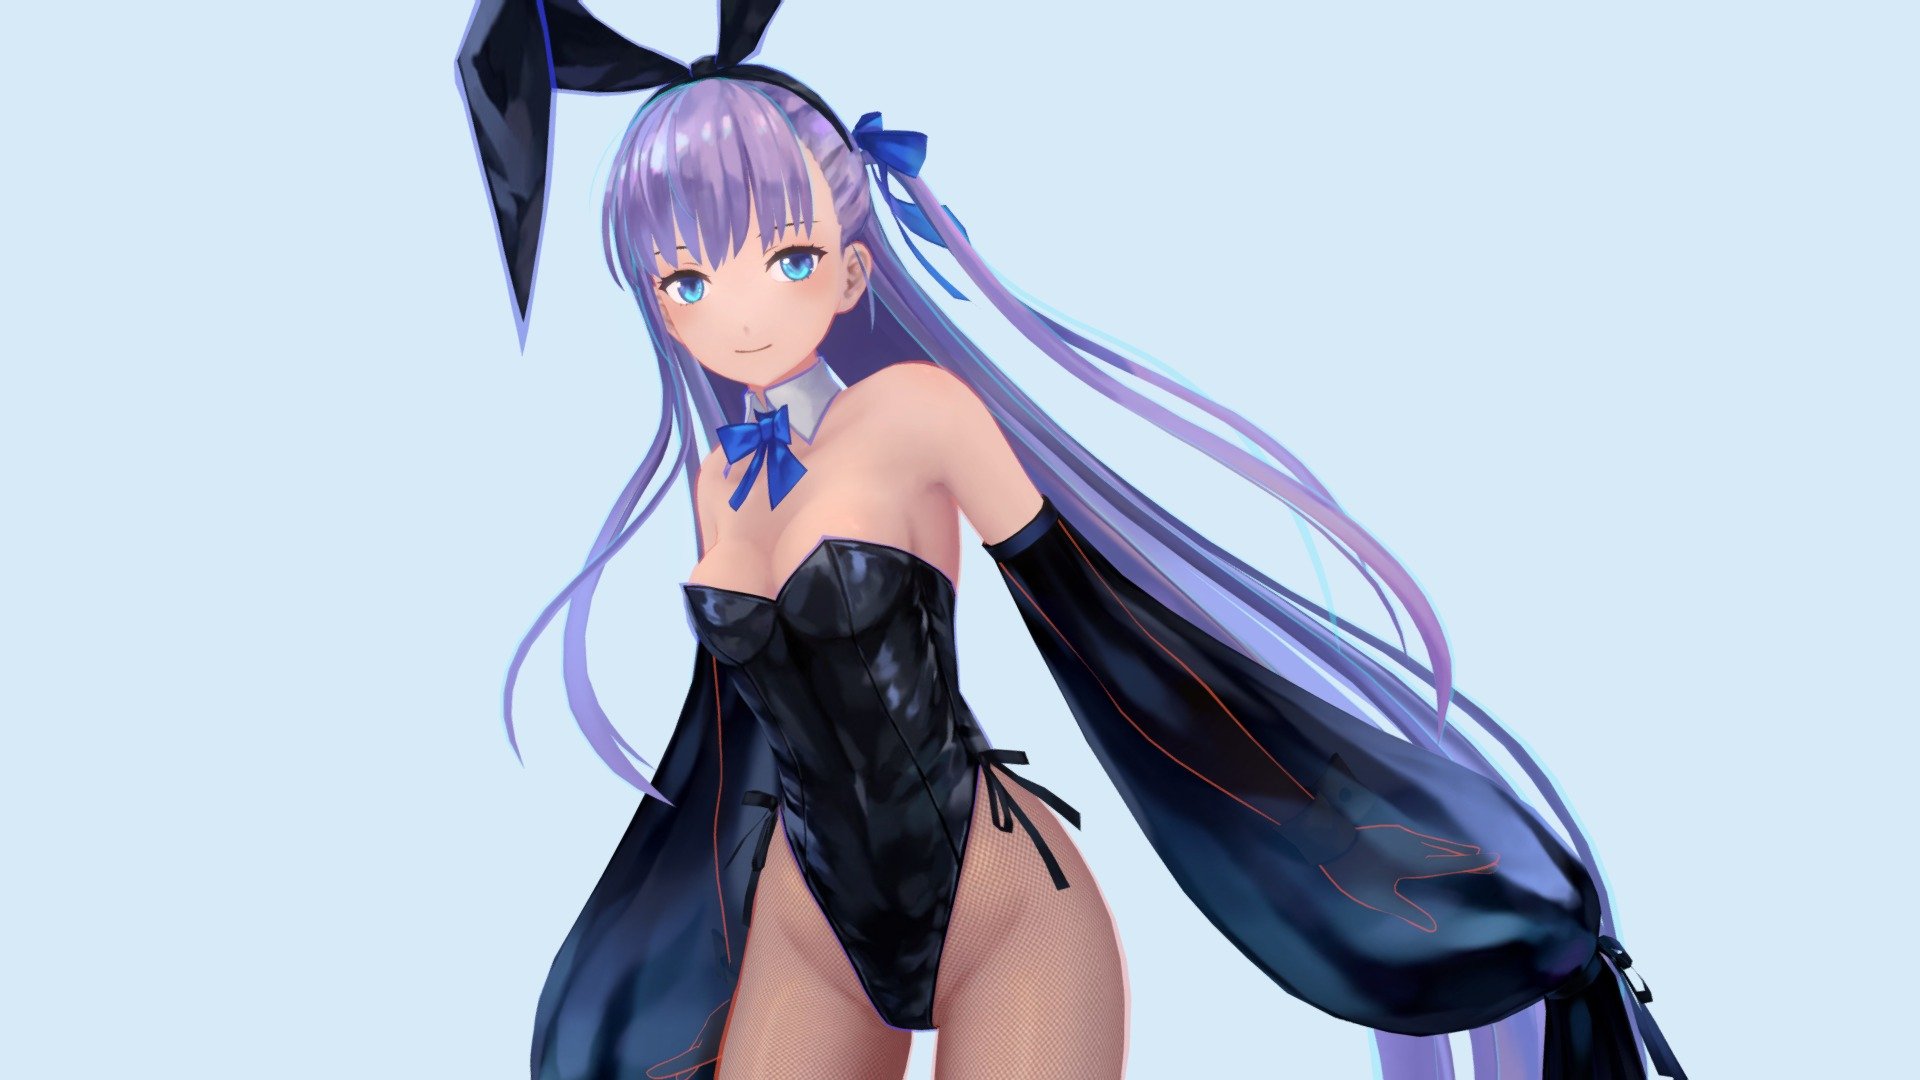 FGO-Meltryllis

This is my vote on the FGO game forum.

selected to be produced !  Meltryllis !

I want to draw a bunny girl!

I did it for almost two months using the holiday time.

I've been too busy and tired lately&hellip;



這是我在FGO遊戲論壇做投票，

選出來製作的，莉莉絲!

我是想作兔女郎裝的!

使用假日時間做了快兩個月，

最近太忙太累了&hellip;









 - Meltryllis - 3D model by YAN (@YAN2017) 3d model